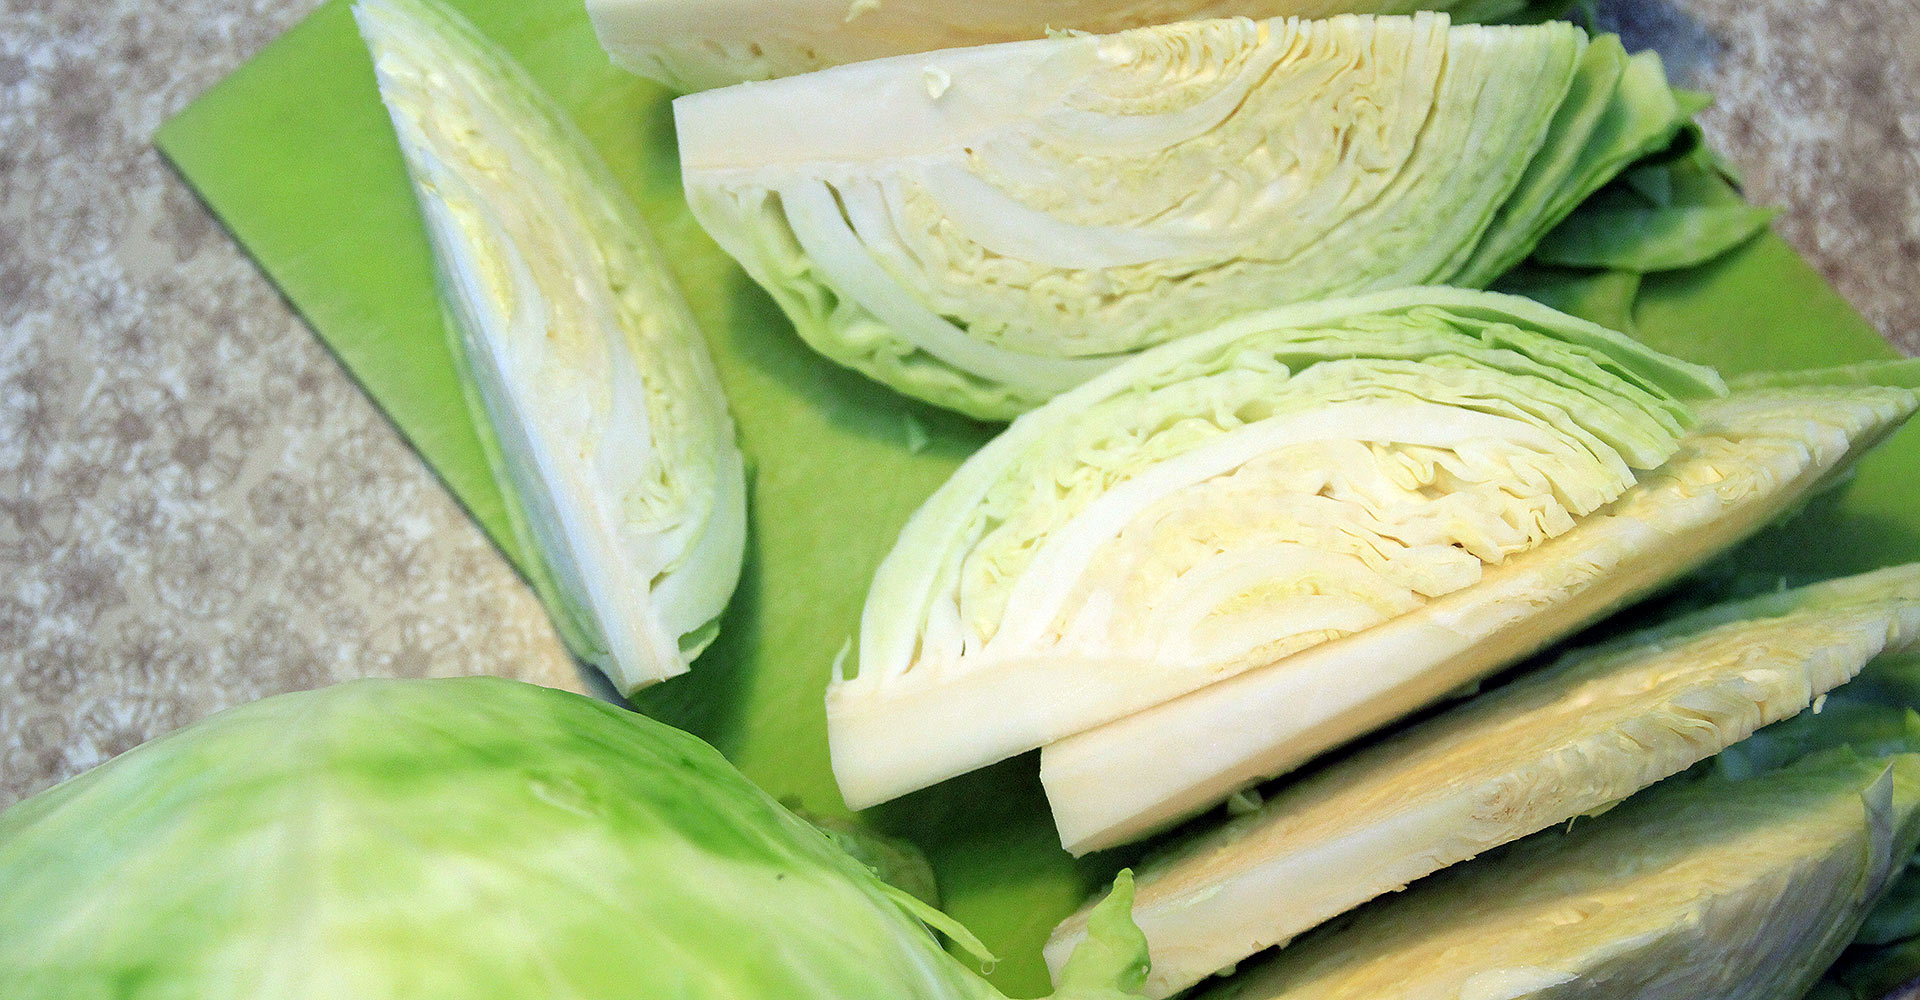 Cabbage sliced into wedges